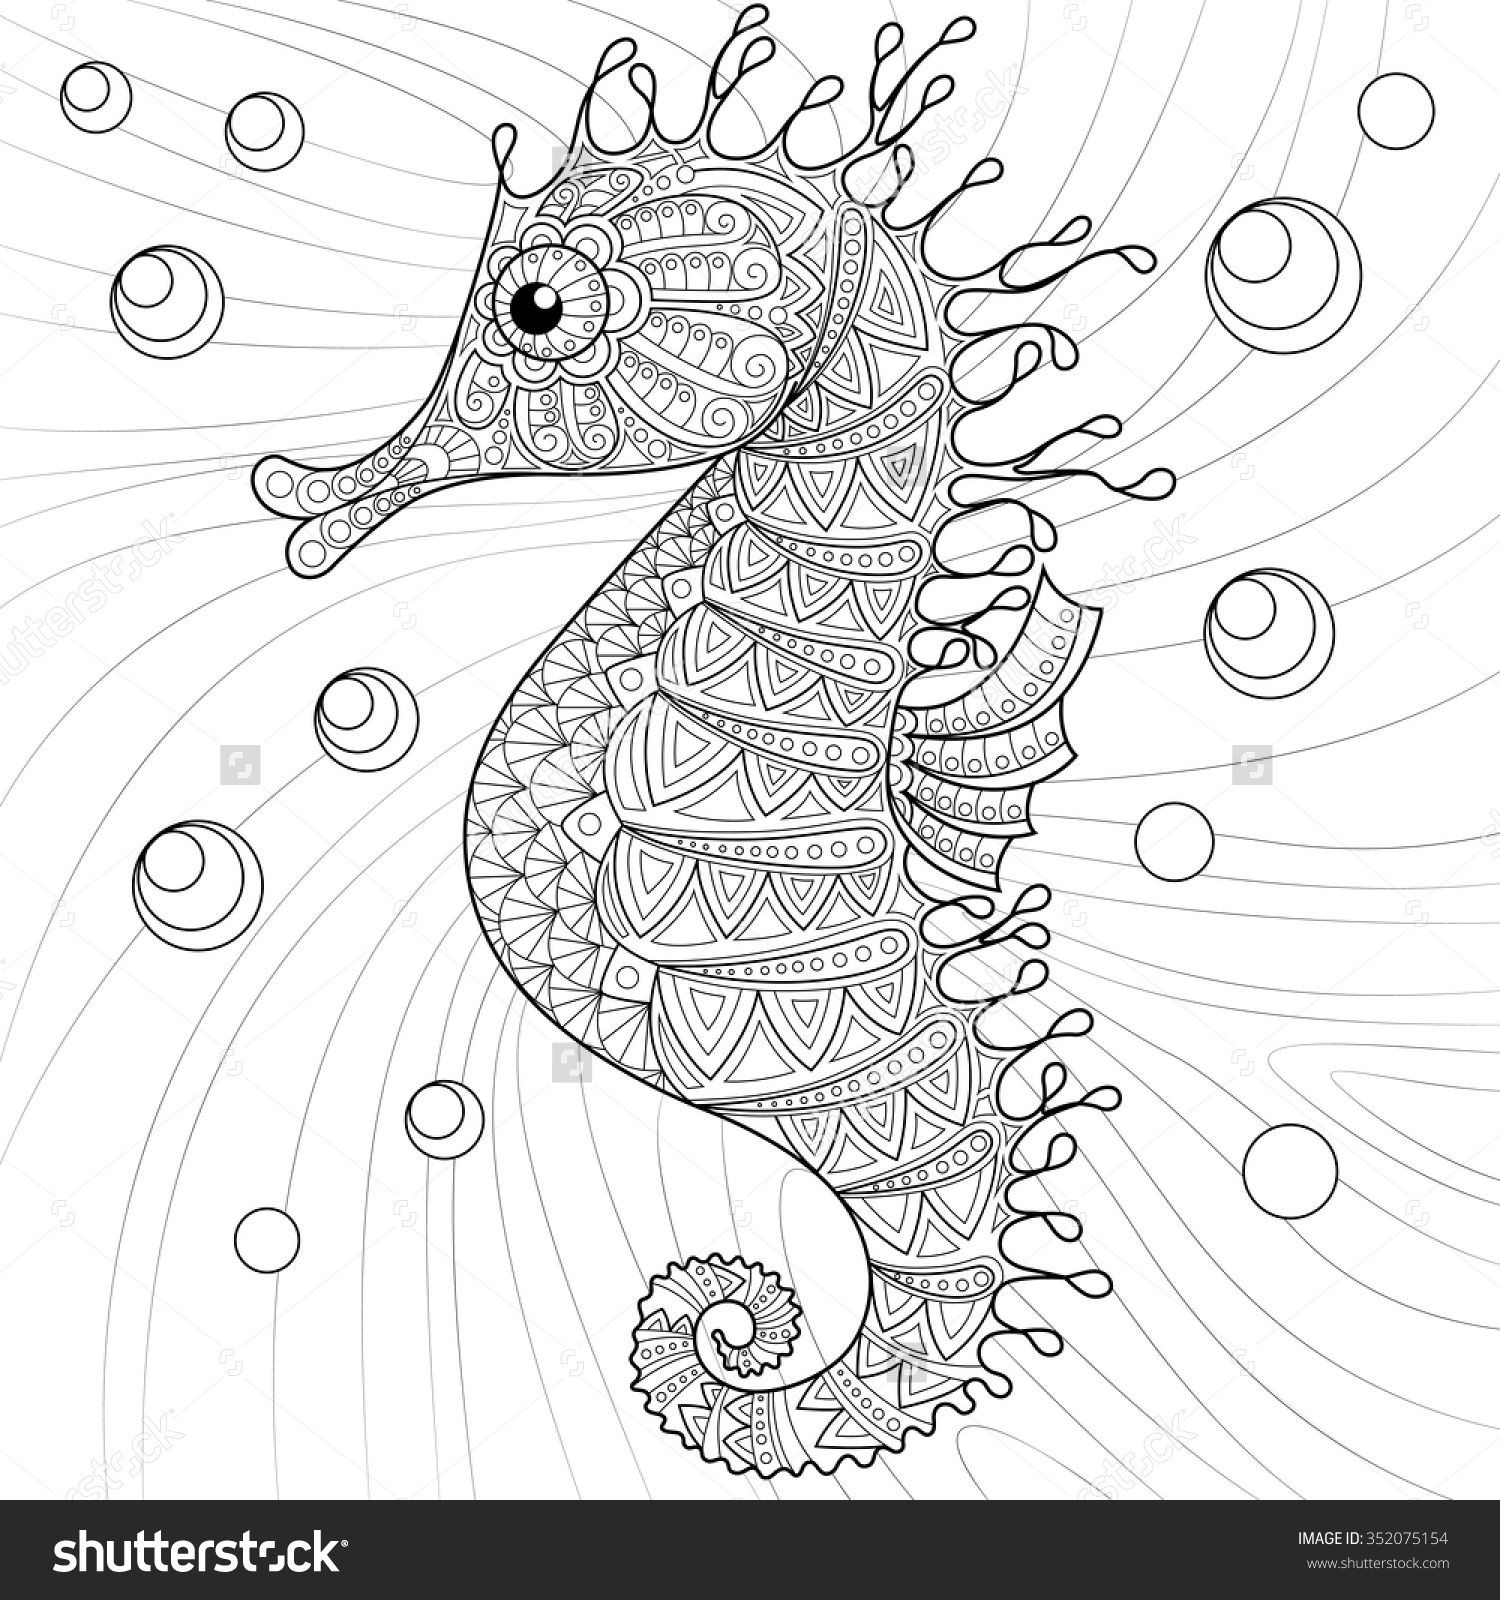 Seahorse Coloring Pages For Adults
 Seahorse Adult Antistress Coloring Page Black And White